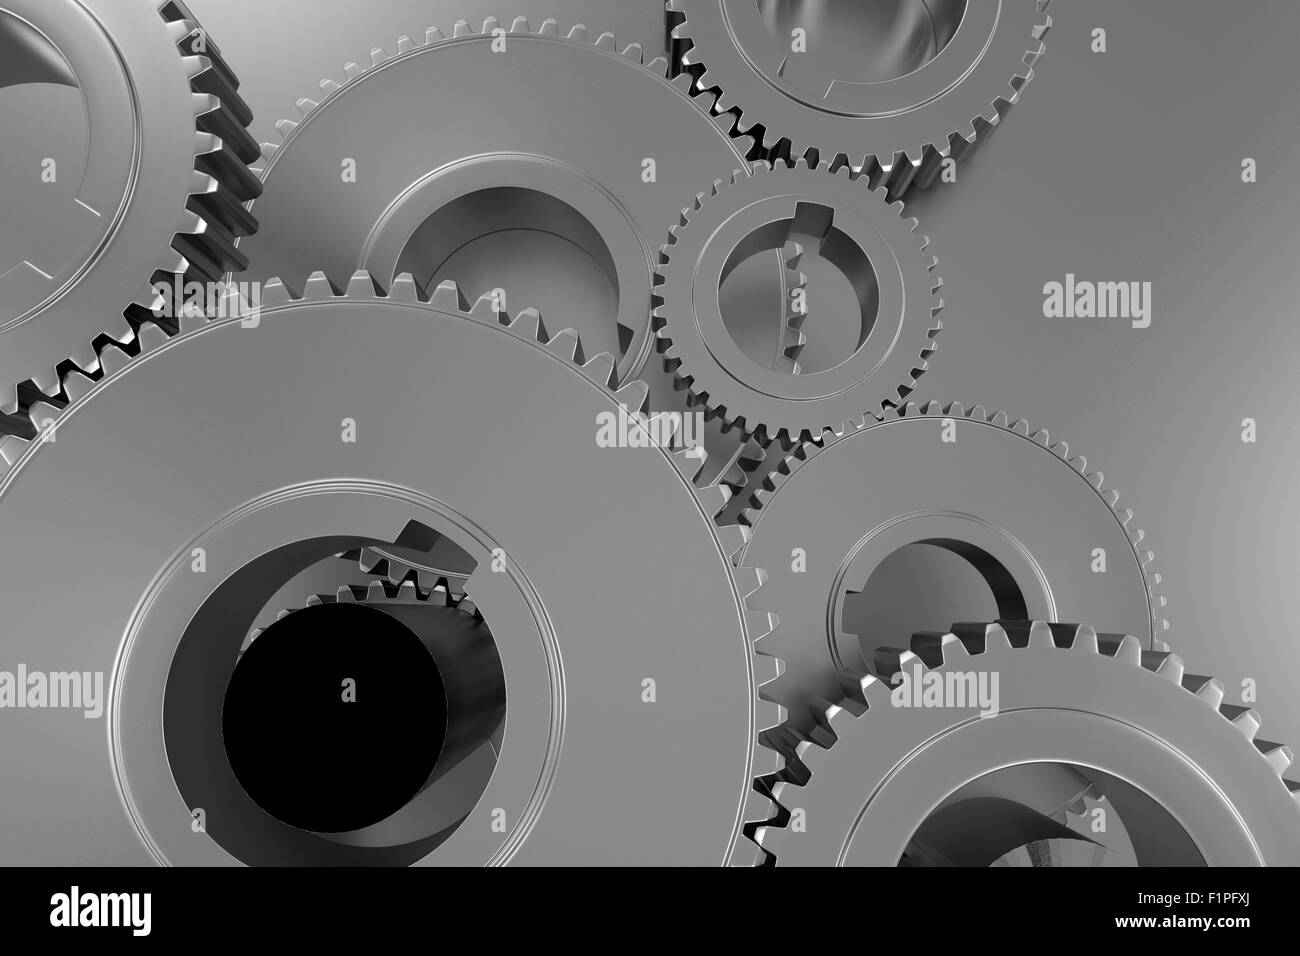 Silver Tech Gears Background. 3D Rendered Polished Metallic Gears Background Stock Photo